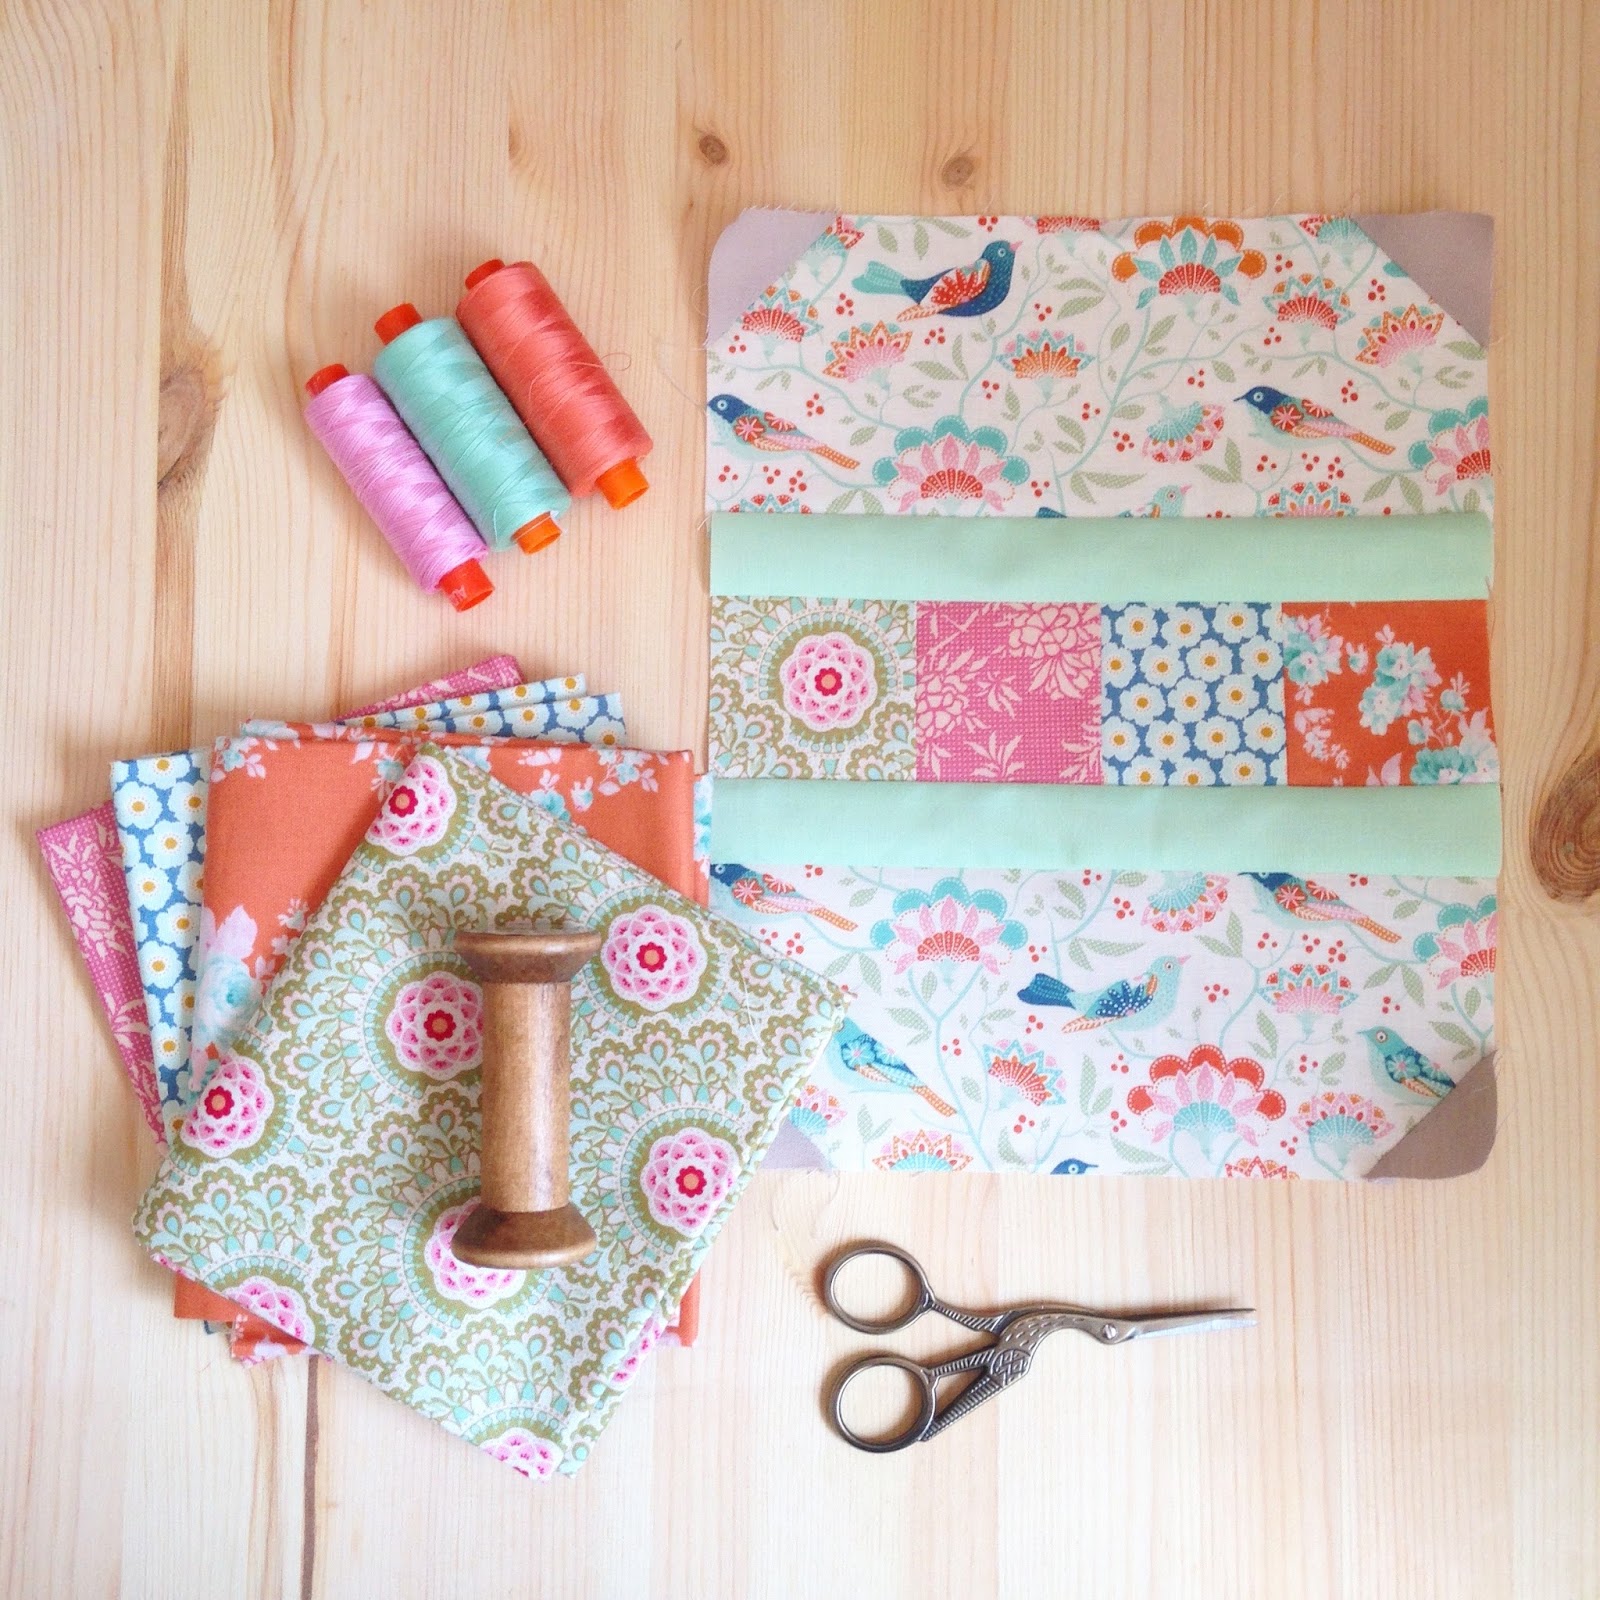 Sneak Peeks and Hand Sewing • Jo Avery - the Blog